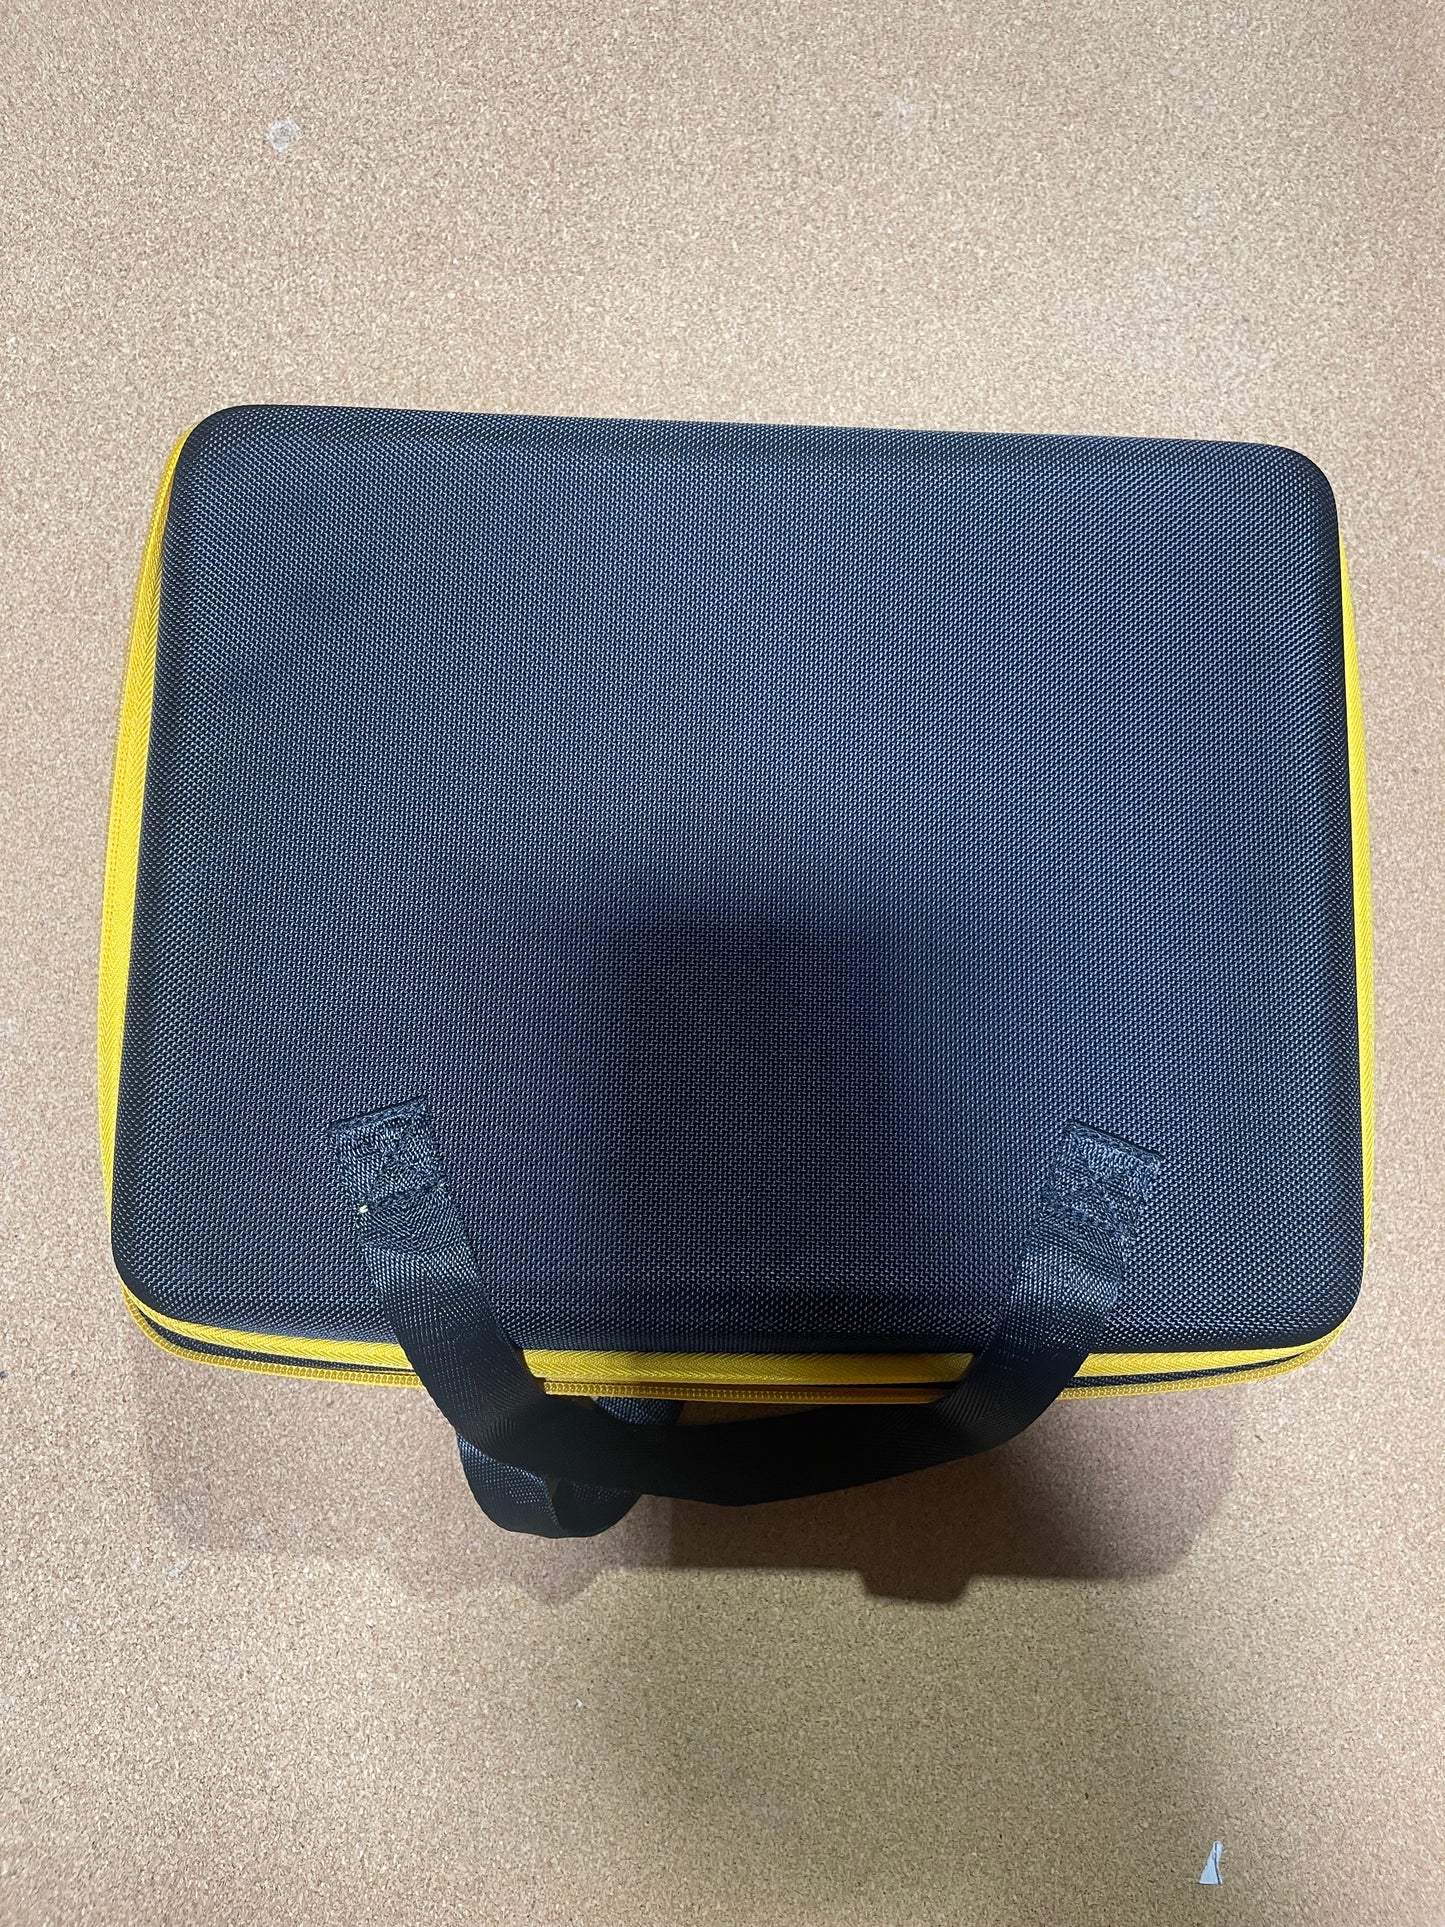 Peacemaker carrying case only